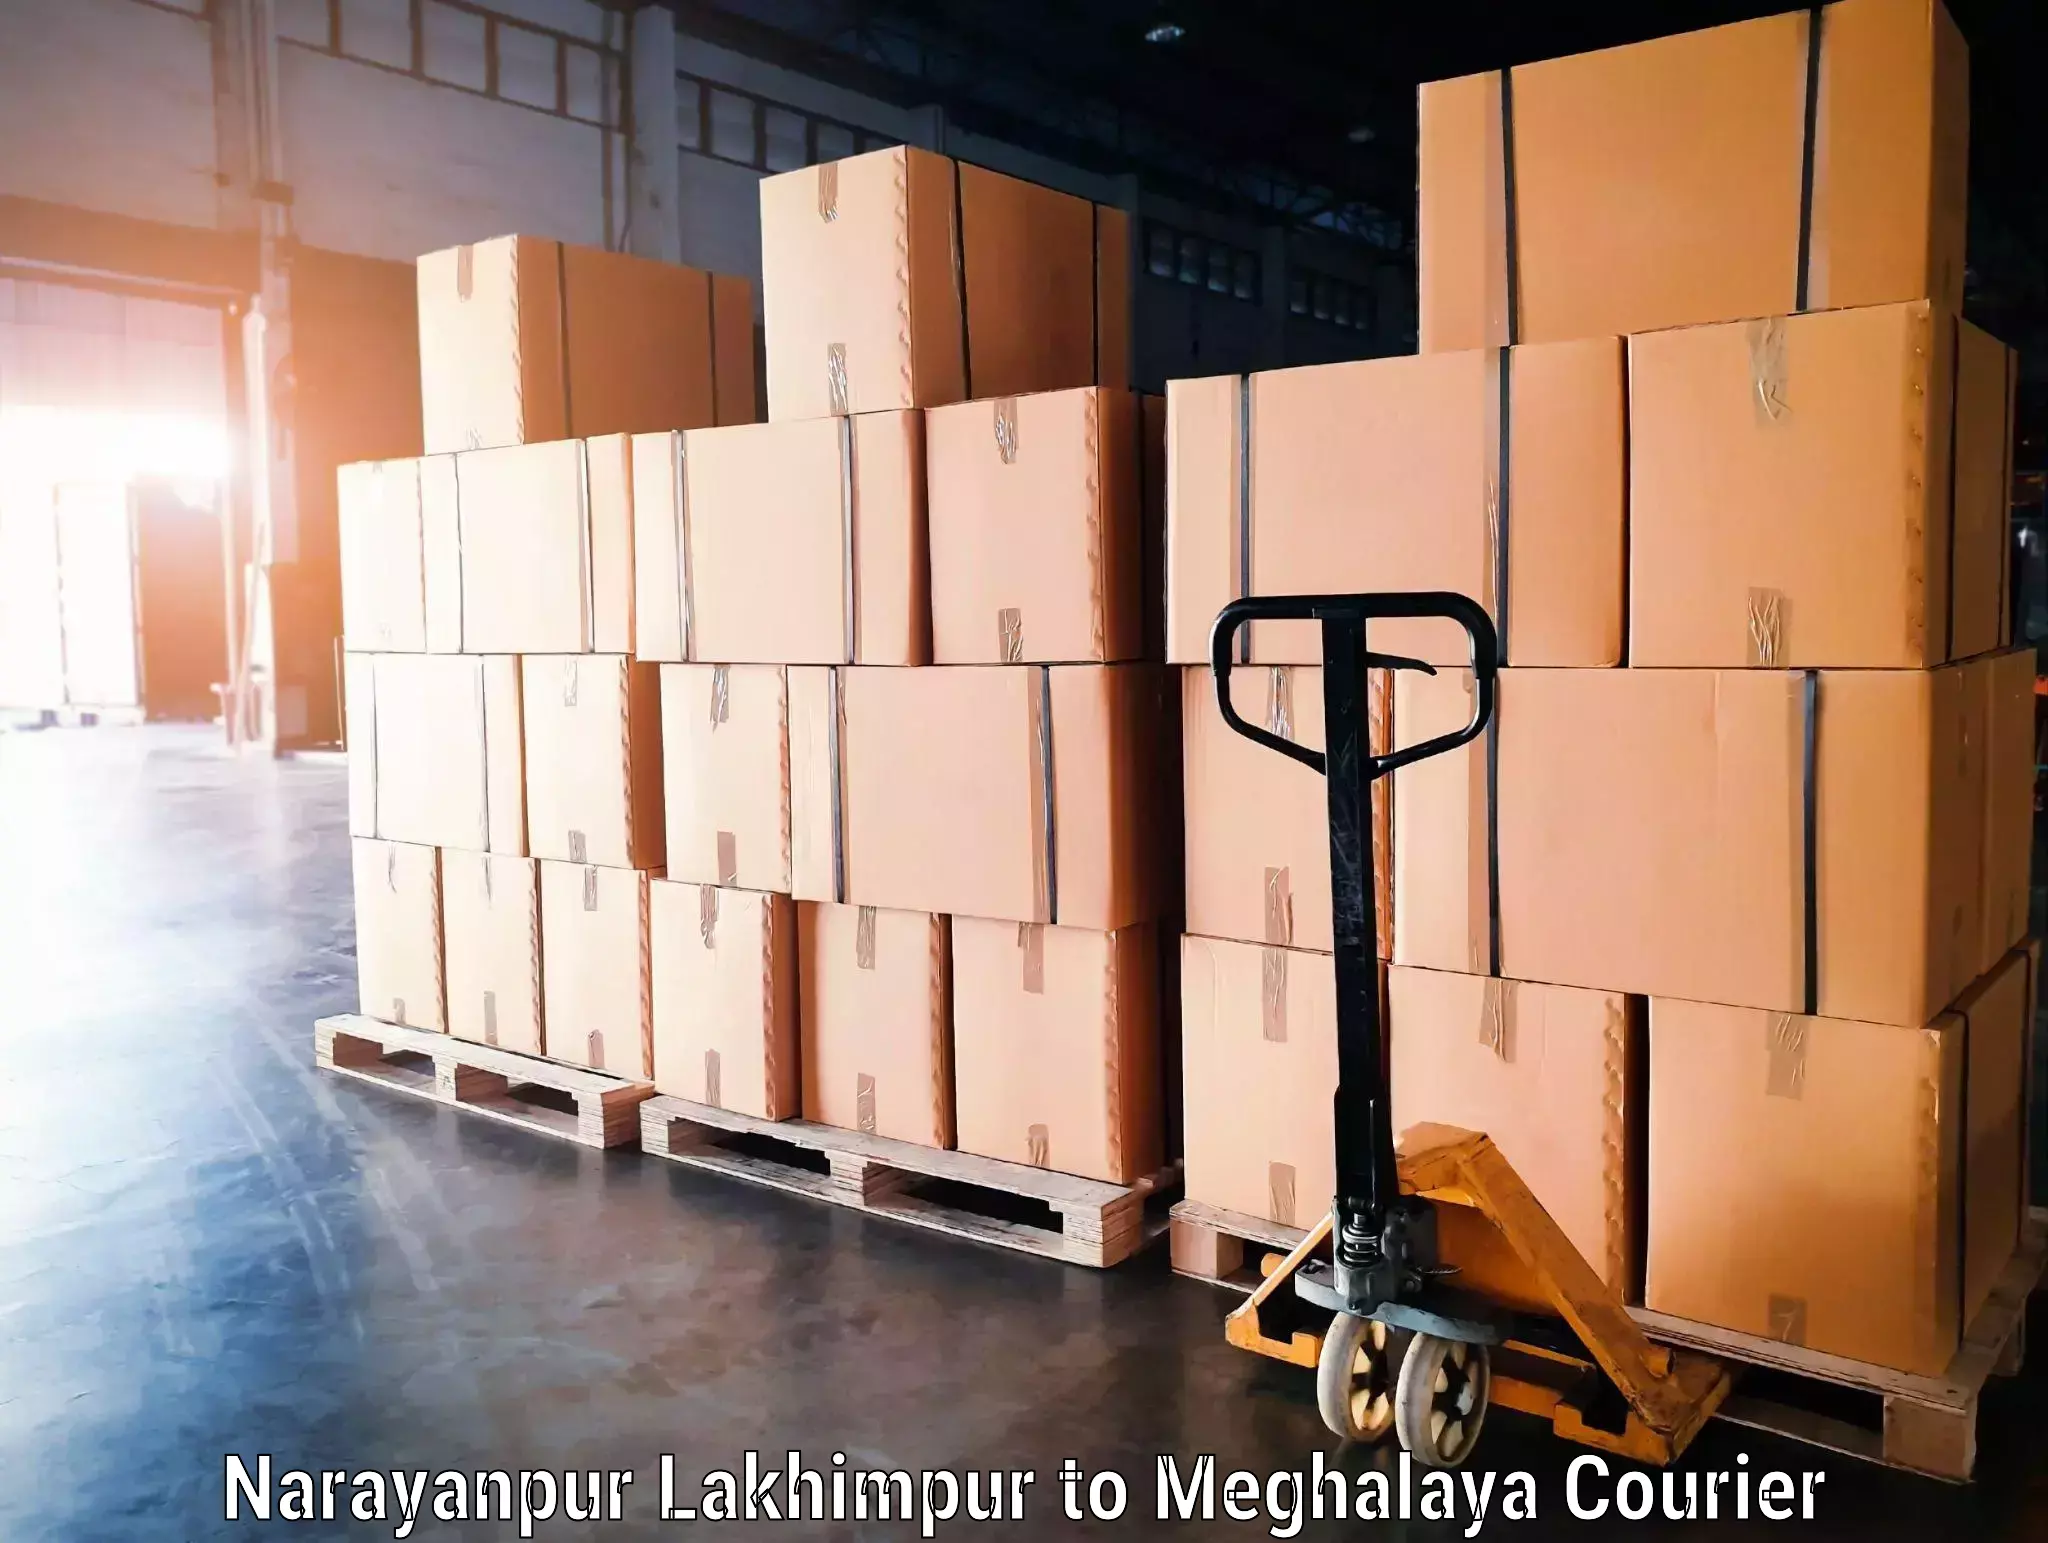 Nationwide luggage courier Narayanpur Lakhimpur to Shillong